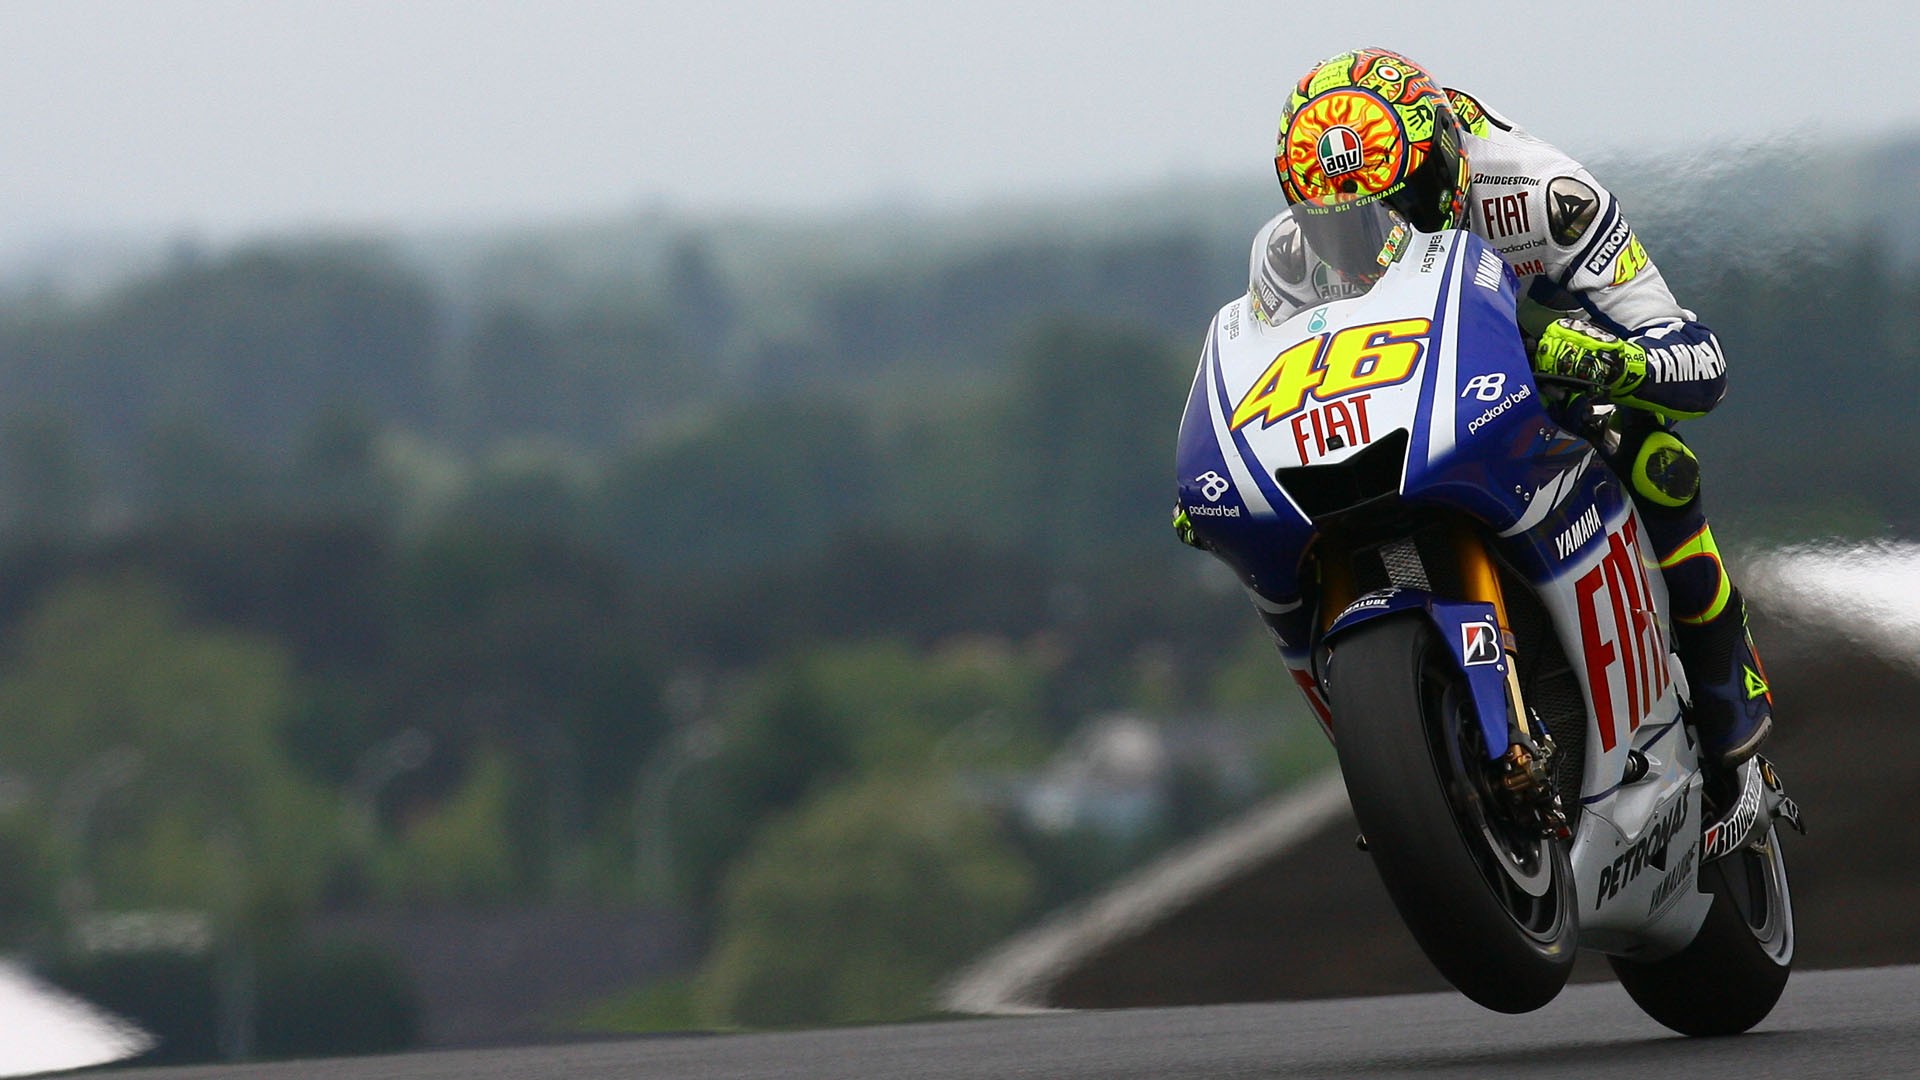 Motogp Good Mobile Background Image Collection